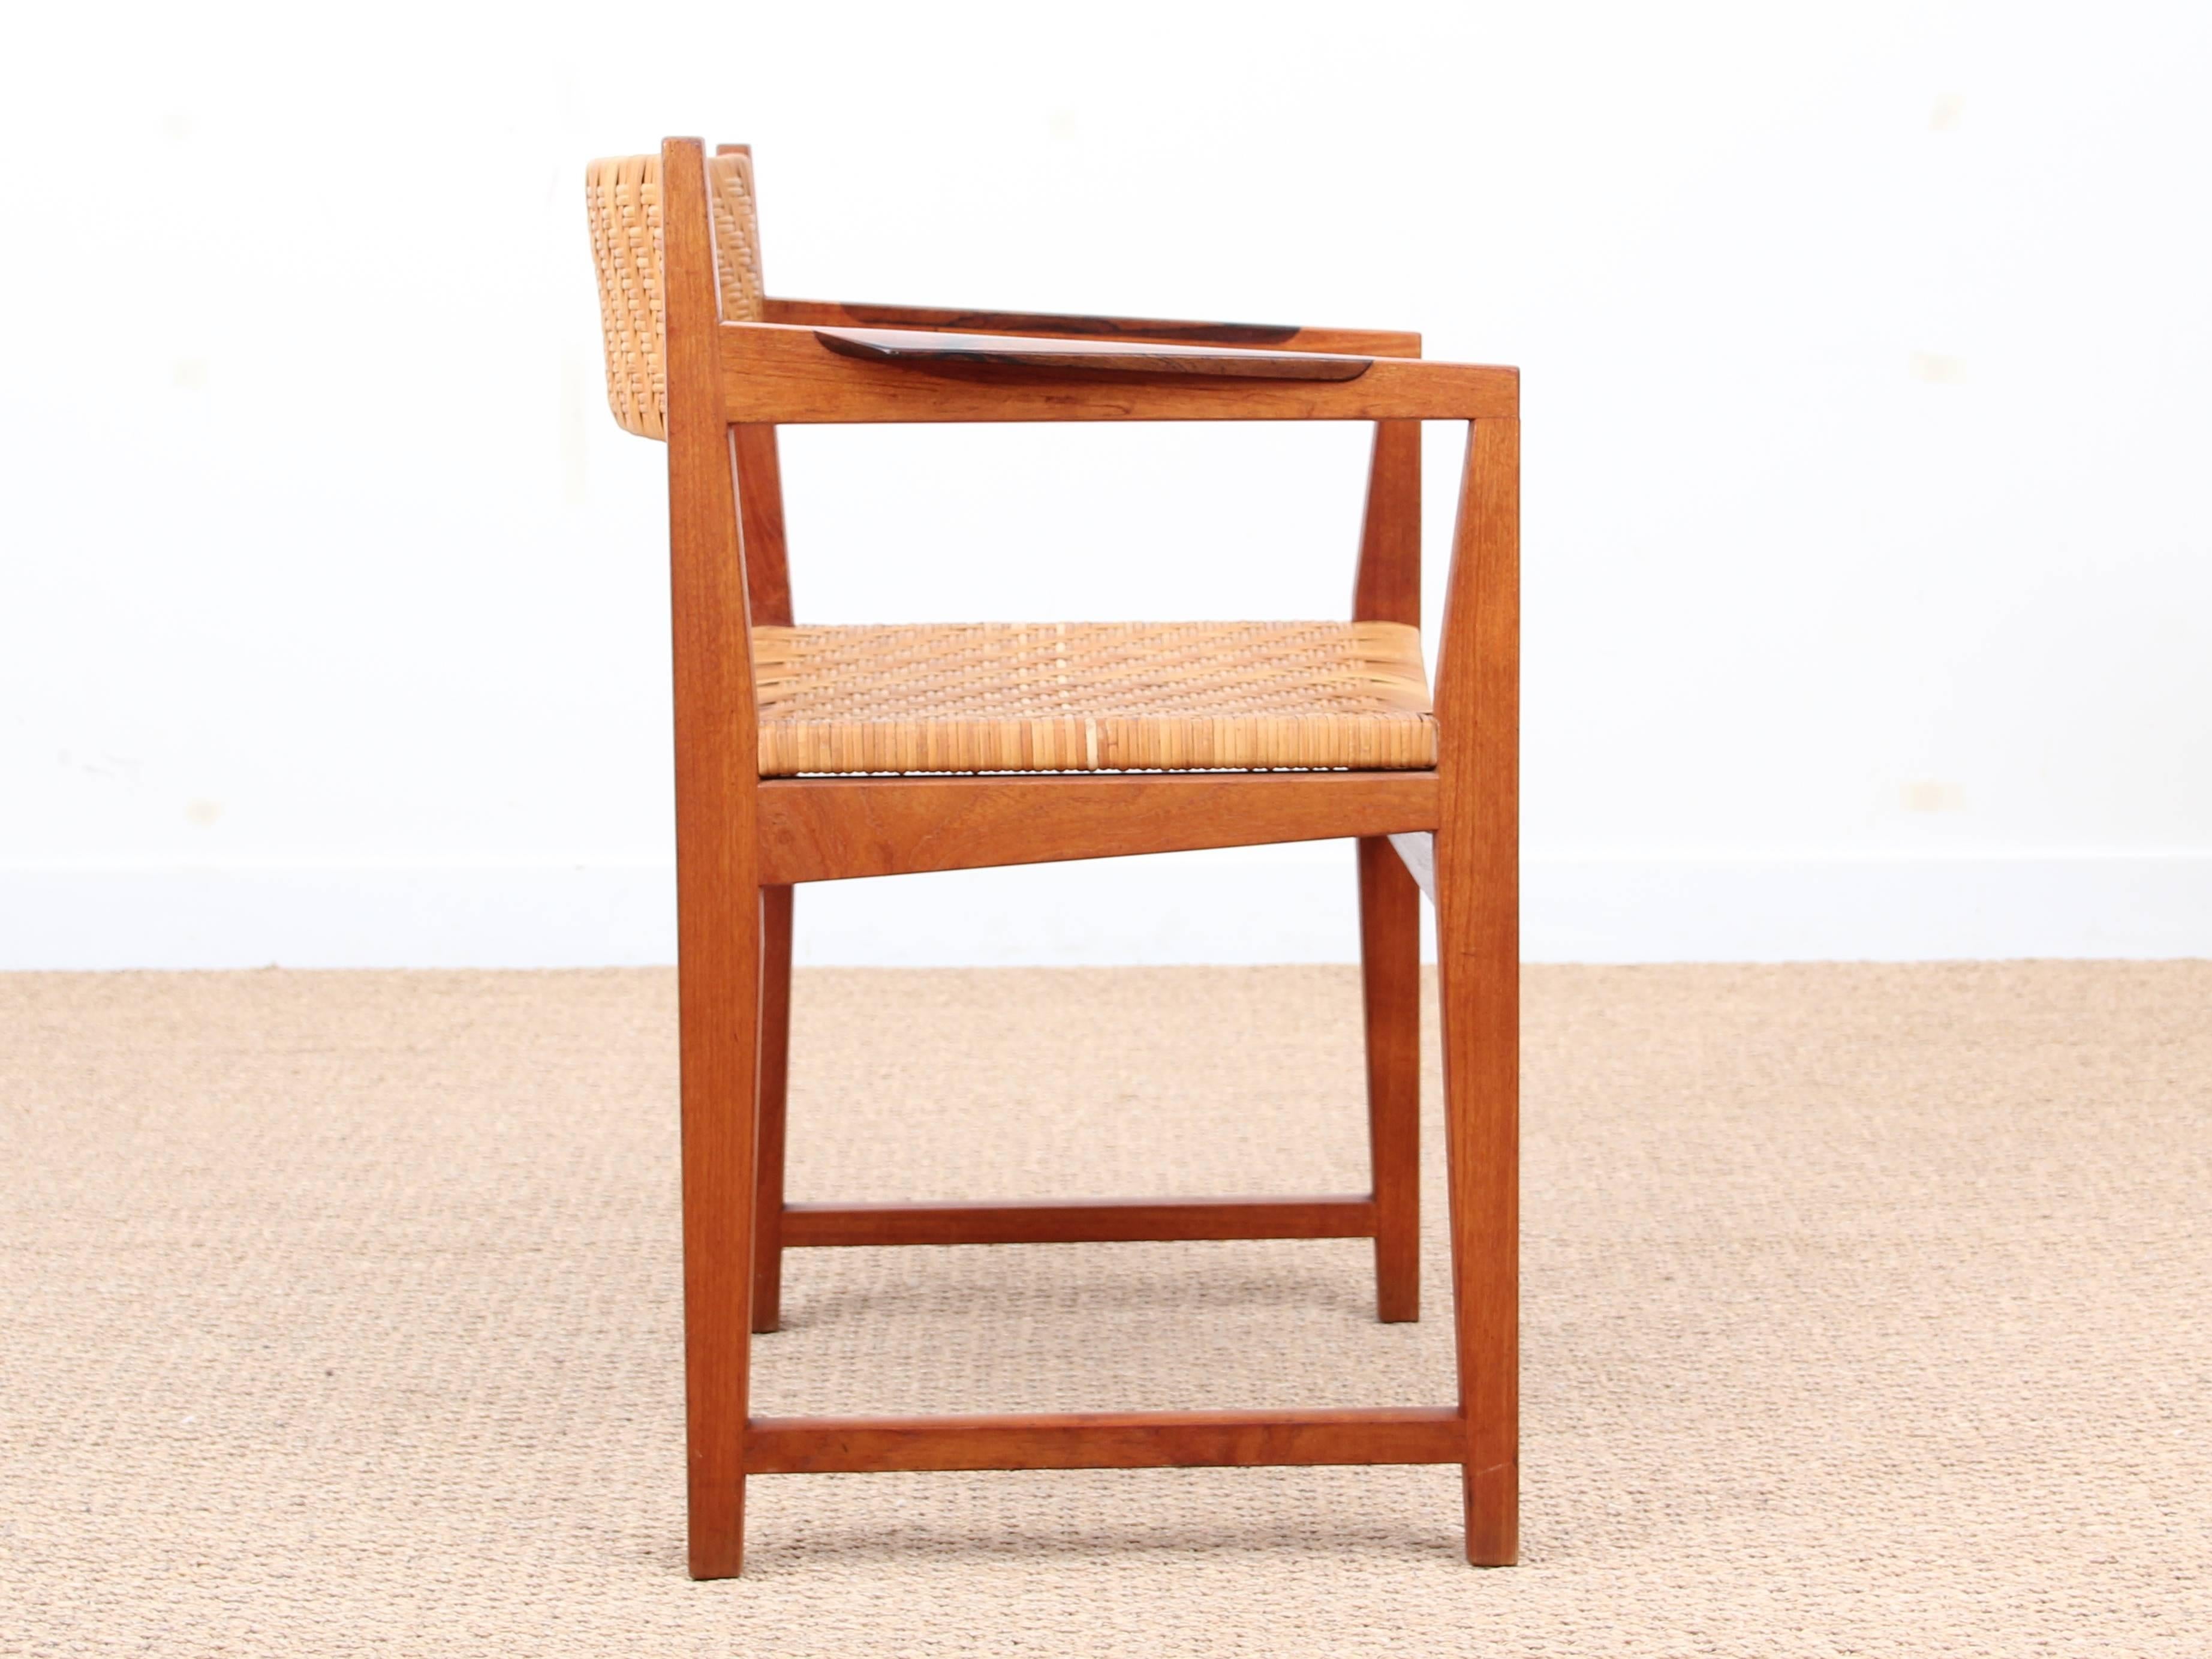 Danish Mid-Century Modern armchair model 350 by Peter & Orla Hvidt & Mølgaard-Nielsen
for Søborg Møbelfabrik. Oak frame with Rio rosewood insertiosn on arms. Referenced by the Design Museum Danmark under number RP02909. Bibliography : DKH